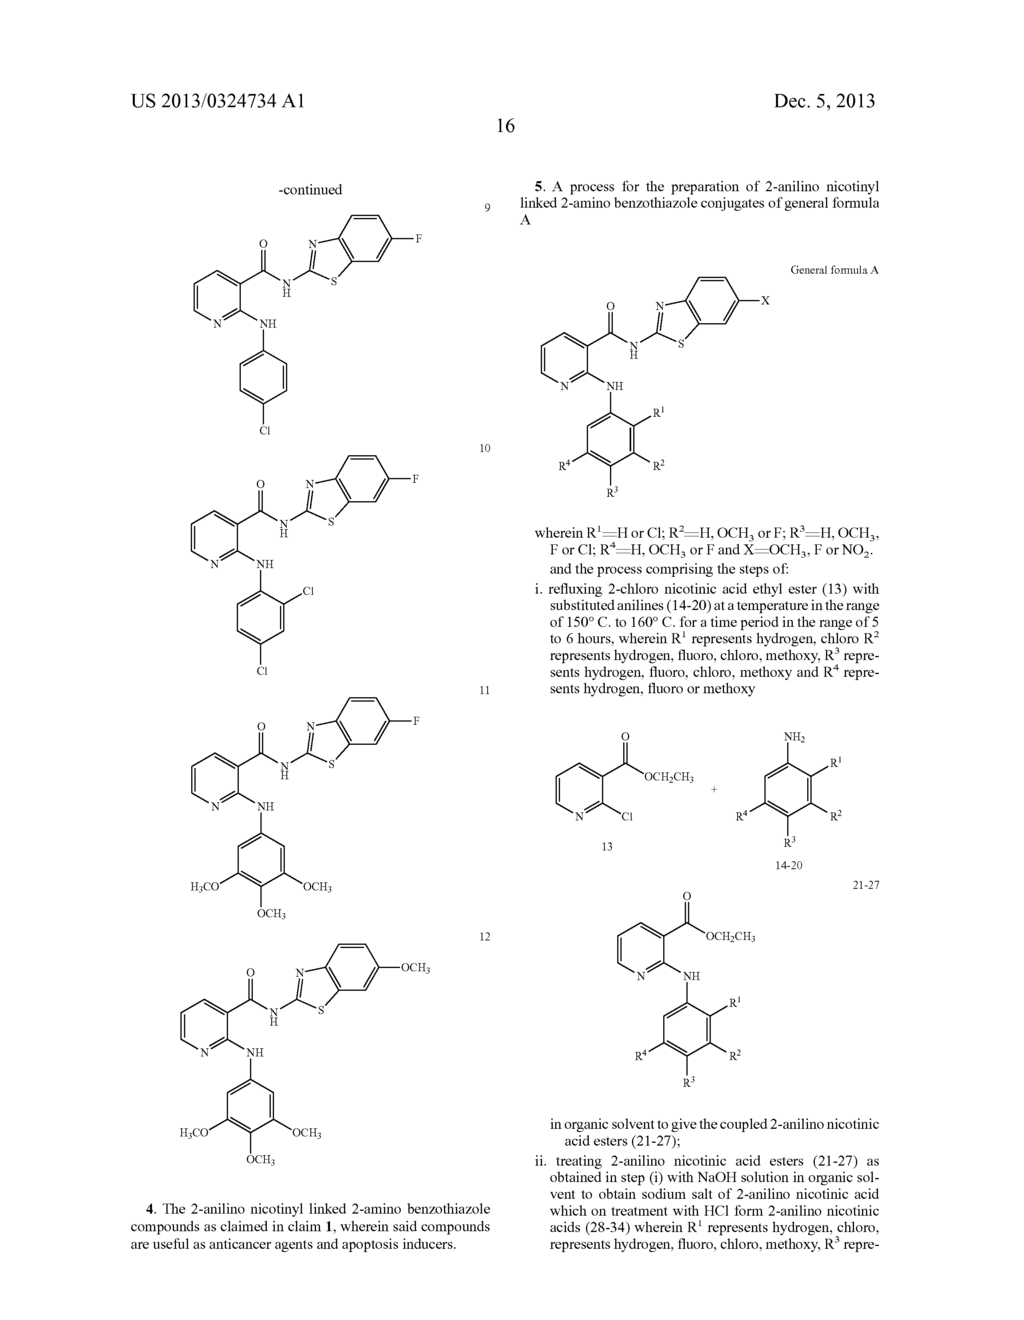 2-ANILINO NICOTINYL LINKED 2-AMINO BENZOTHIAZOLE CONJUGATES AND PROCESS     FOR THE PREPARATION THEREOF - diagram, schematic, and image 31